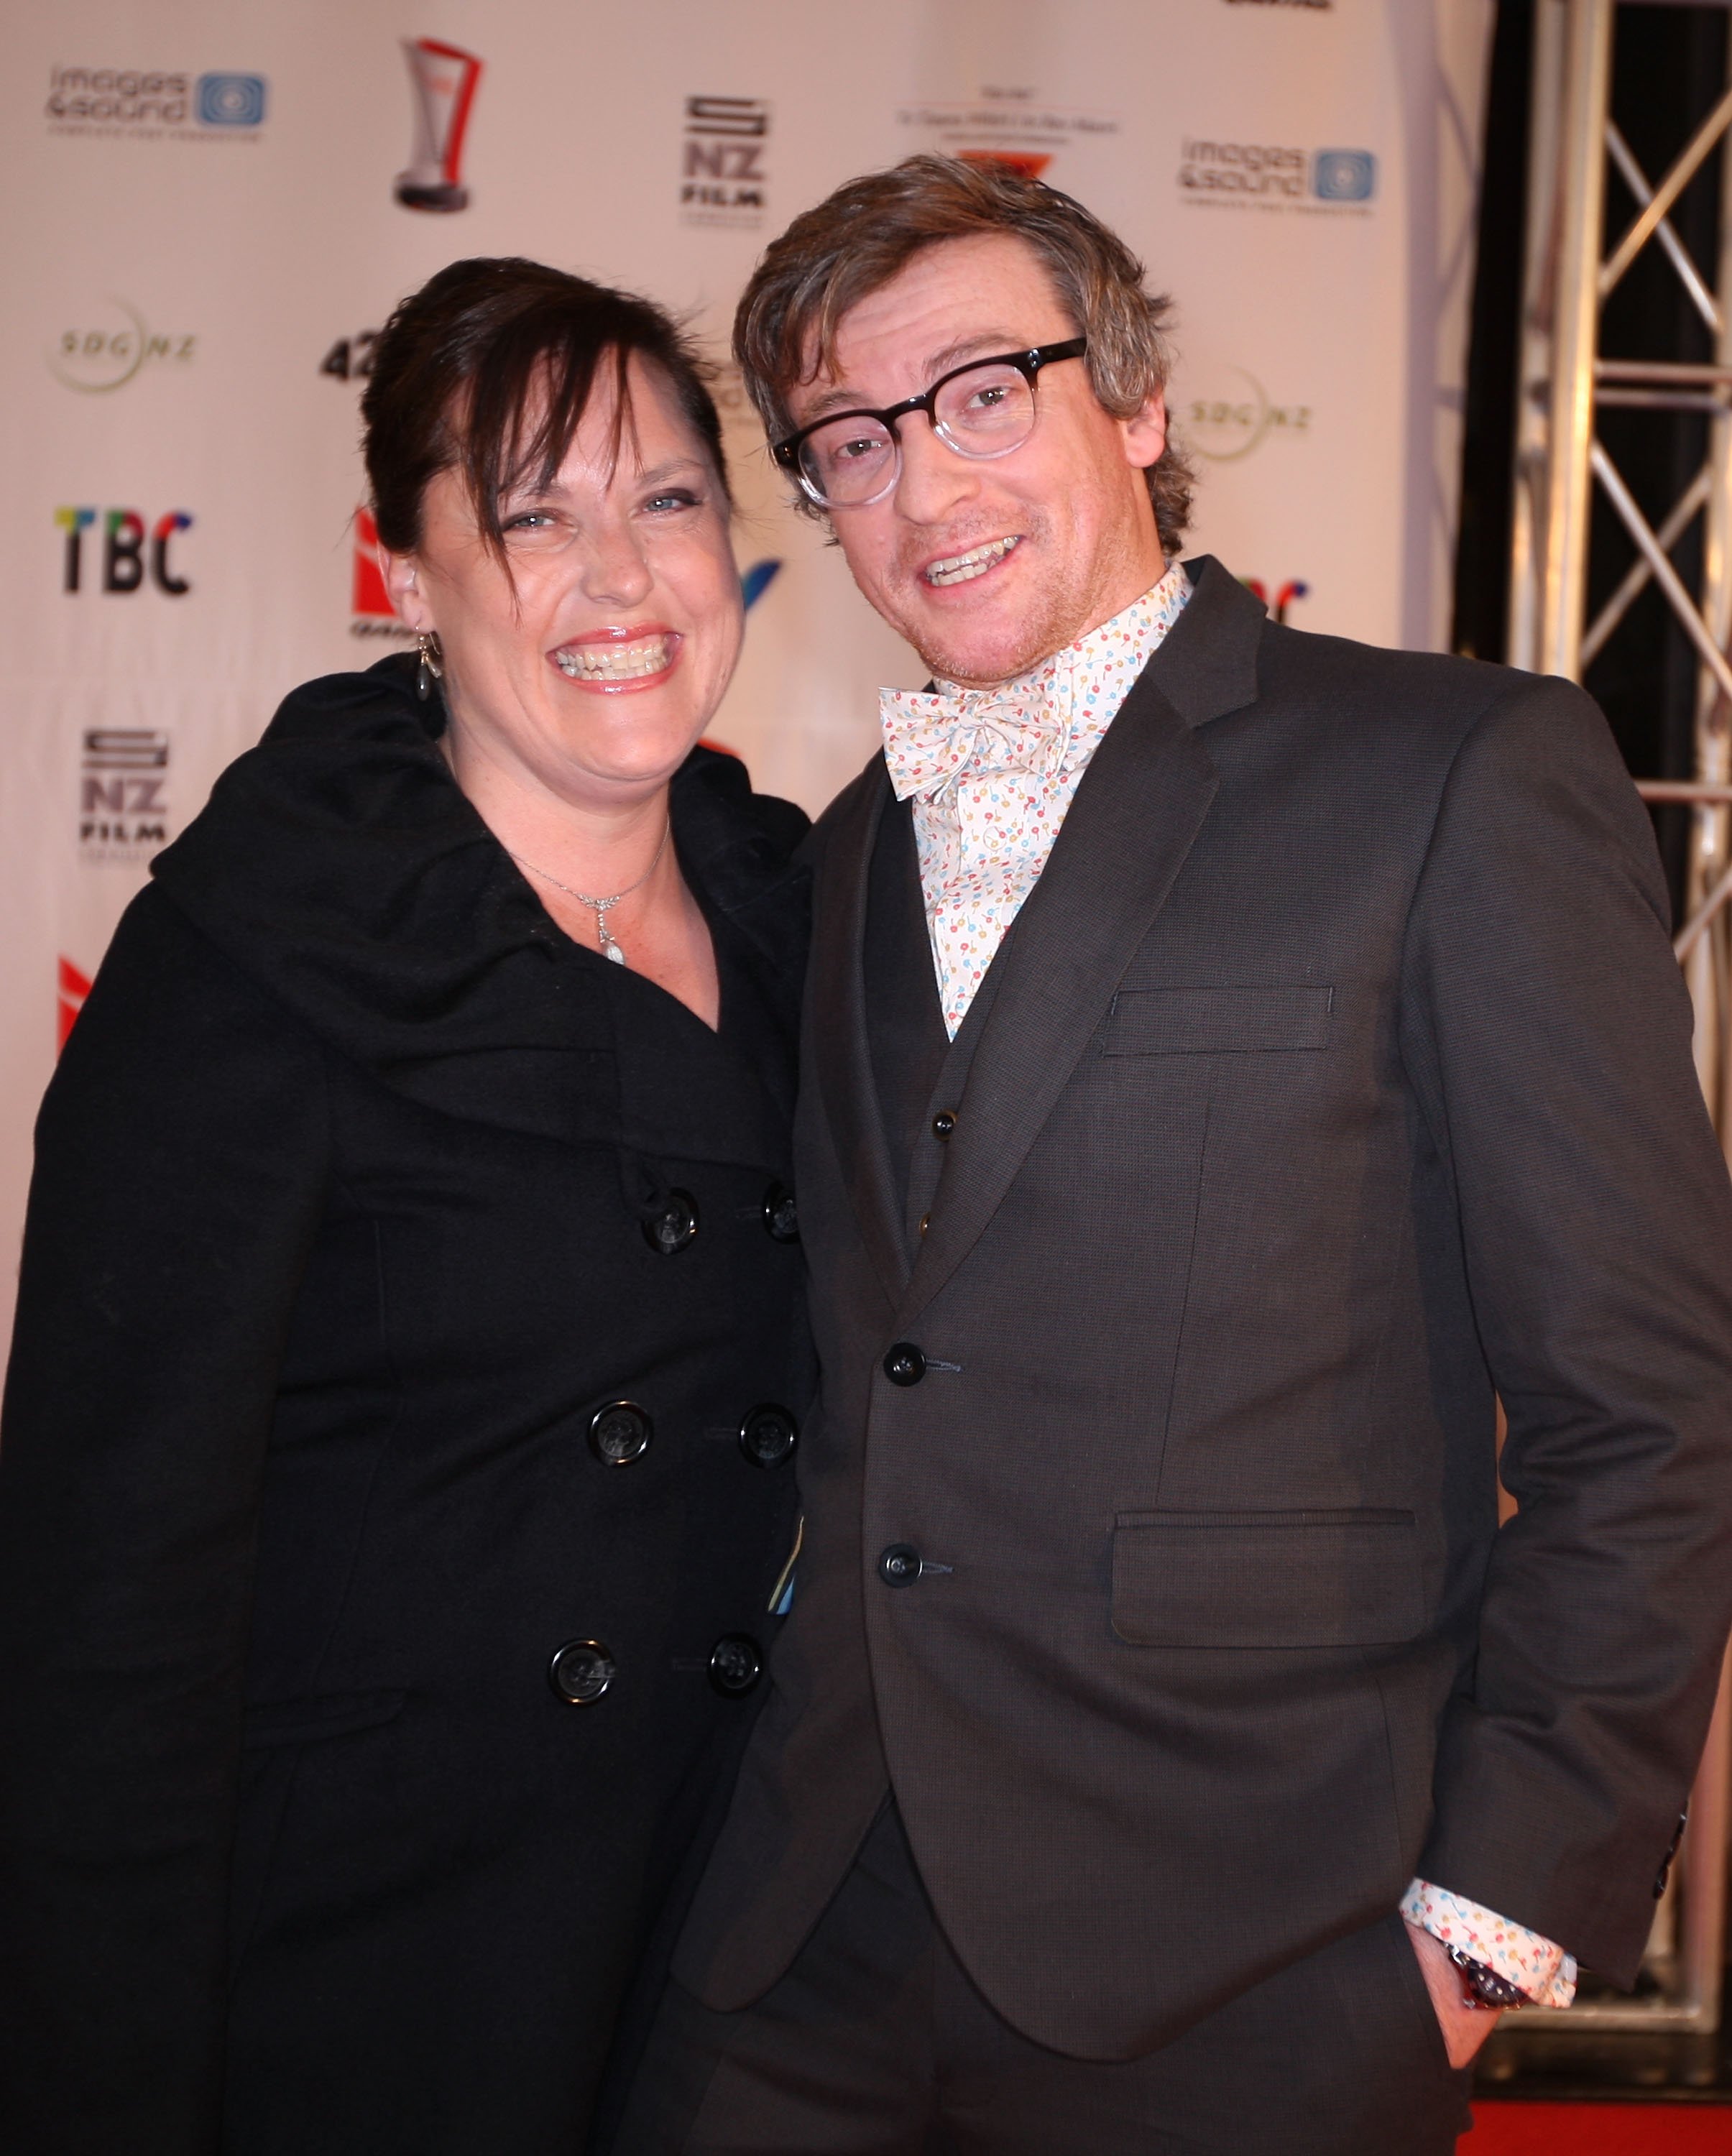 Rosie Carnahan and Rhys Darby at the 2010 Qantas Film & Television Awards on September 18, 2010, in New Zealand | Source: Getty Images